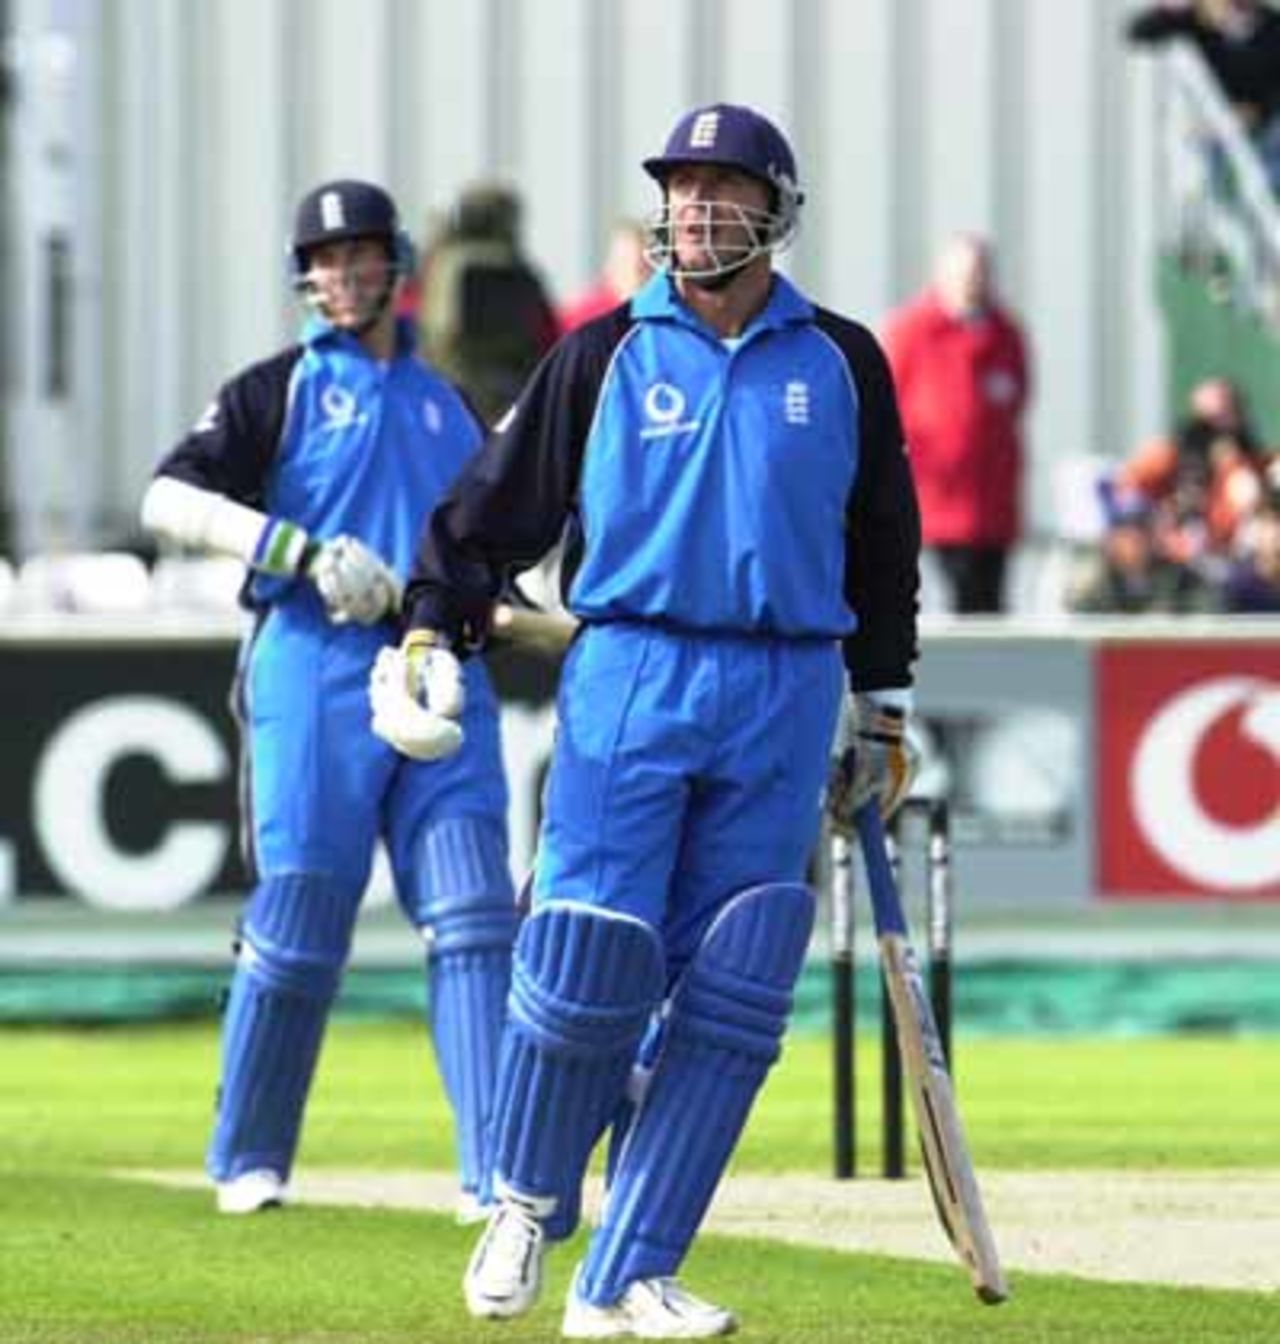 England v West Indies at the Riverside, Chester le Street 2000 in the Nat West series